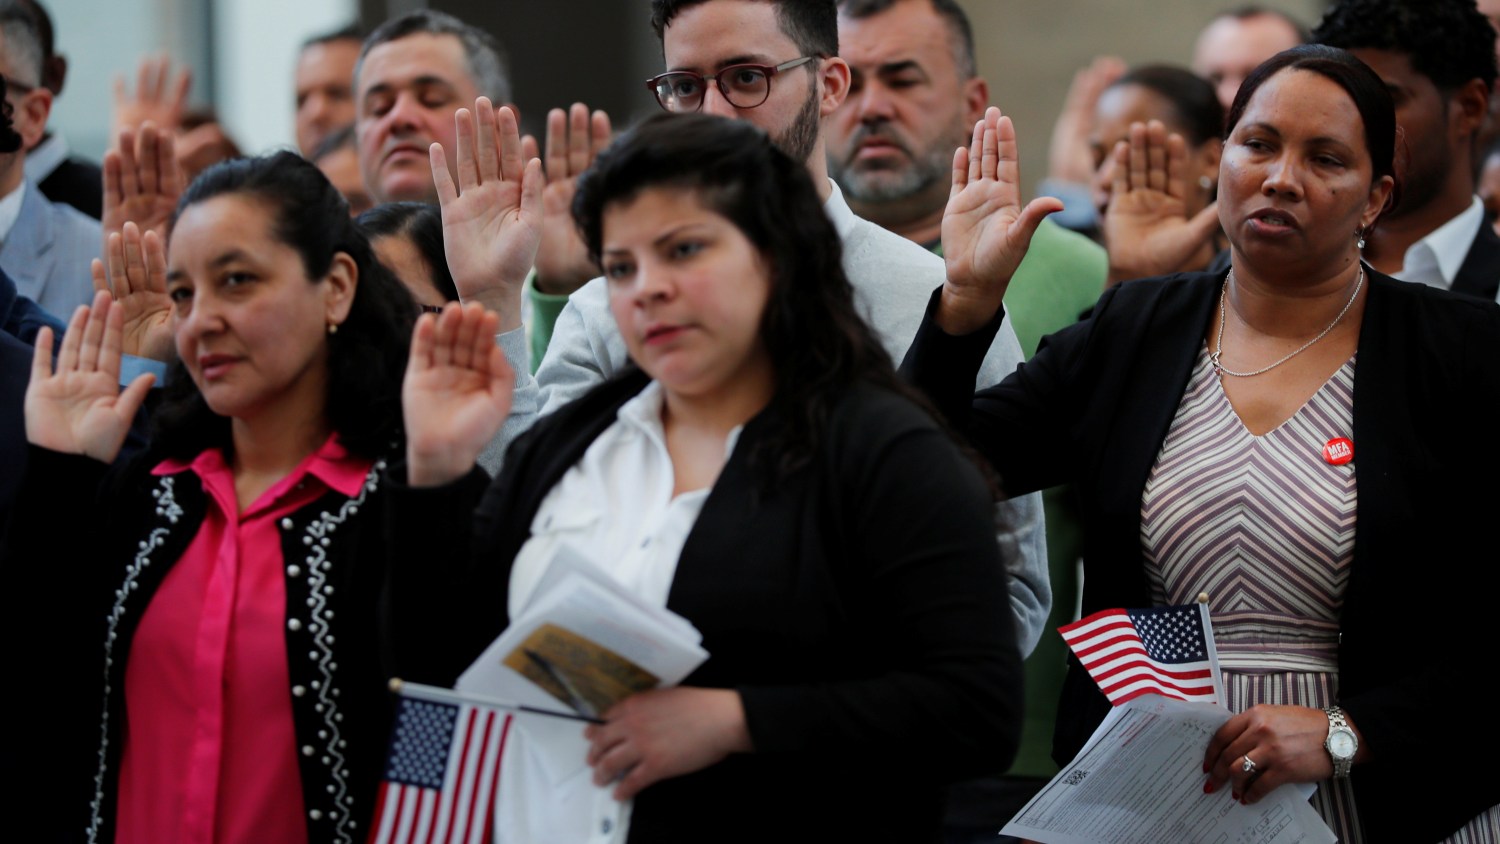 Immigrants take the Oath of Allegiance to become a U.S. citizens during an official Naturalization Ceremony at the Museum of Fine Arts, Boston in Boston, Massachusetts, U.S., May 6, 2019.   REUTERS/Brian Snyder - RC1FAA5D2010